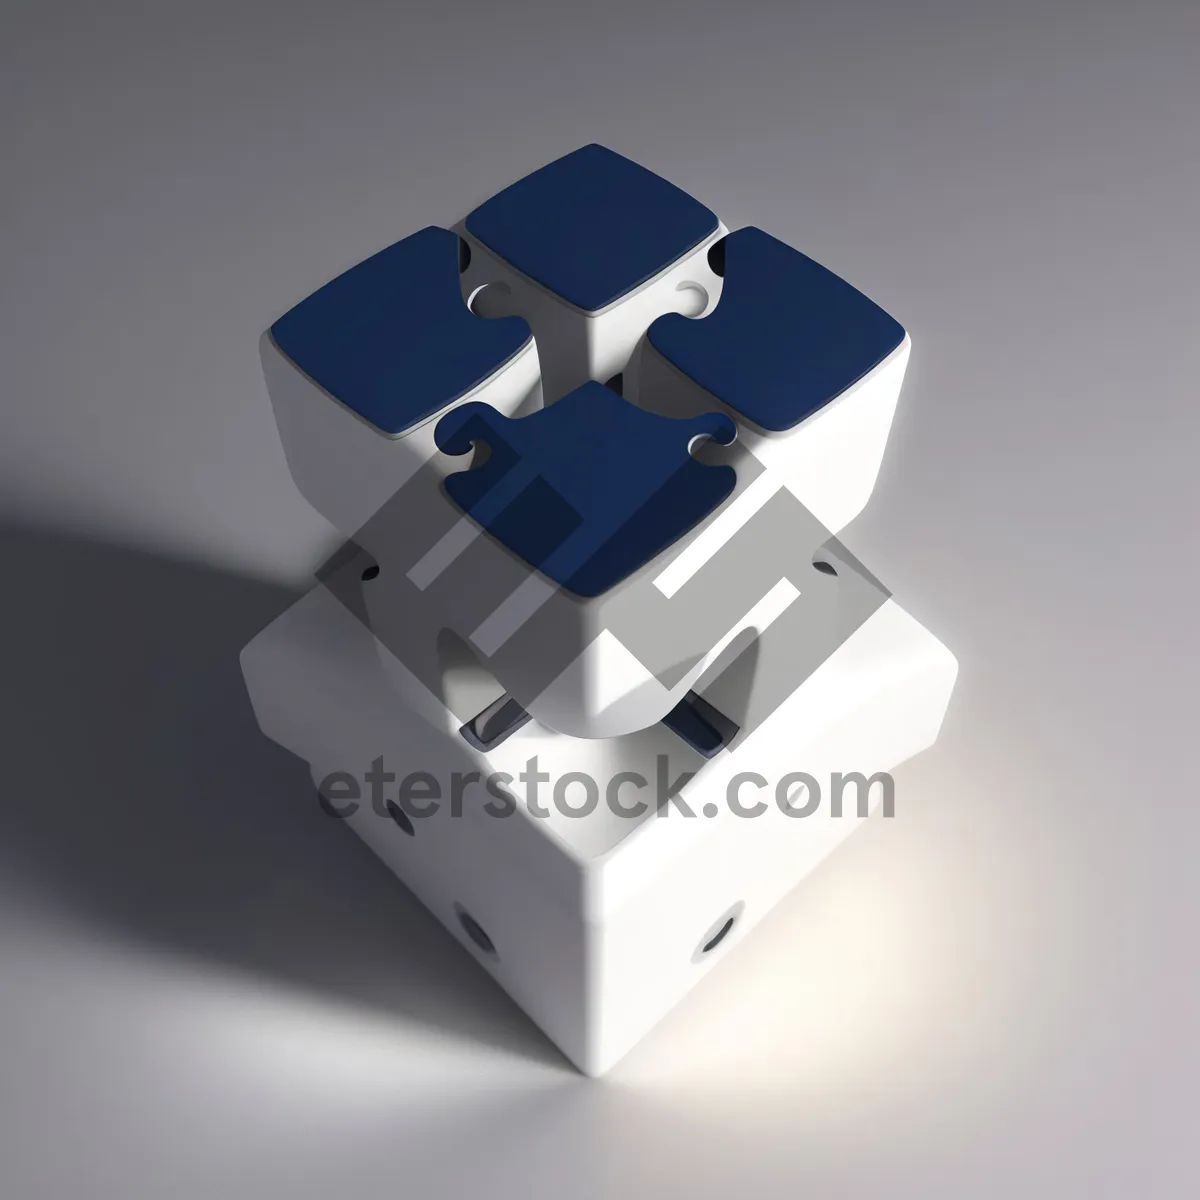 Picture of 3D Gem Design Cube in Symbolic Package Box